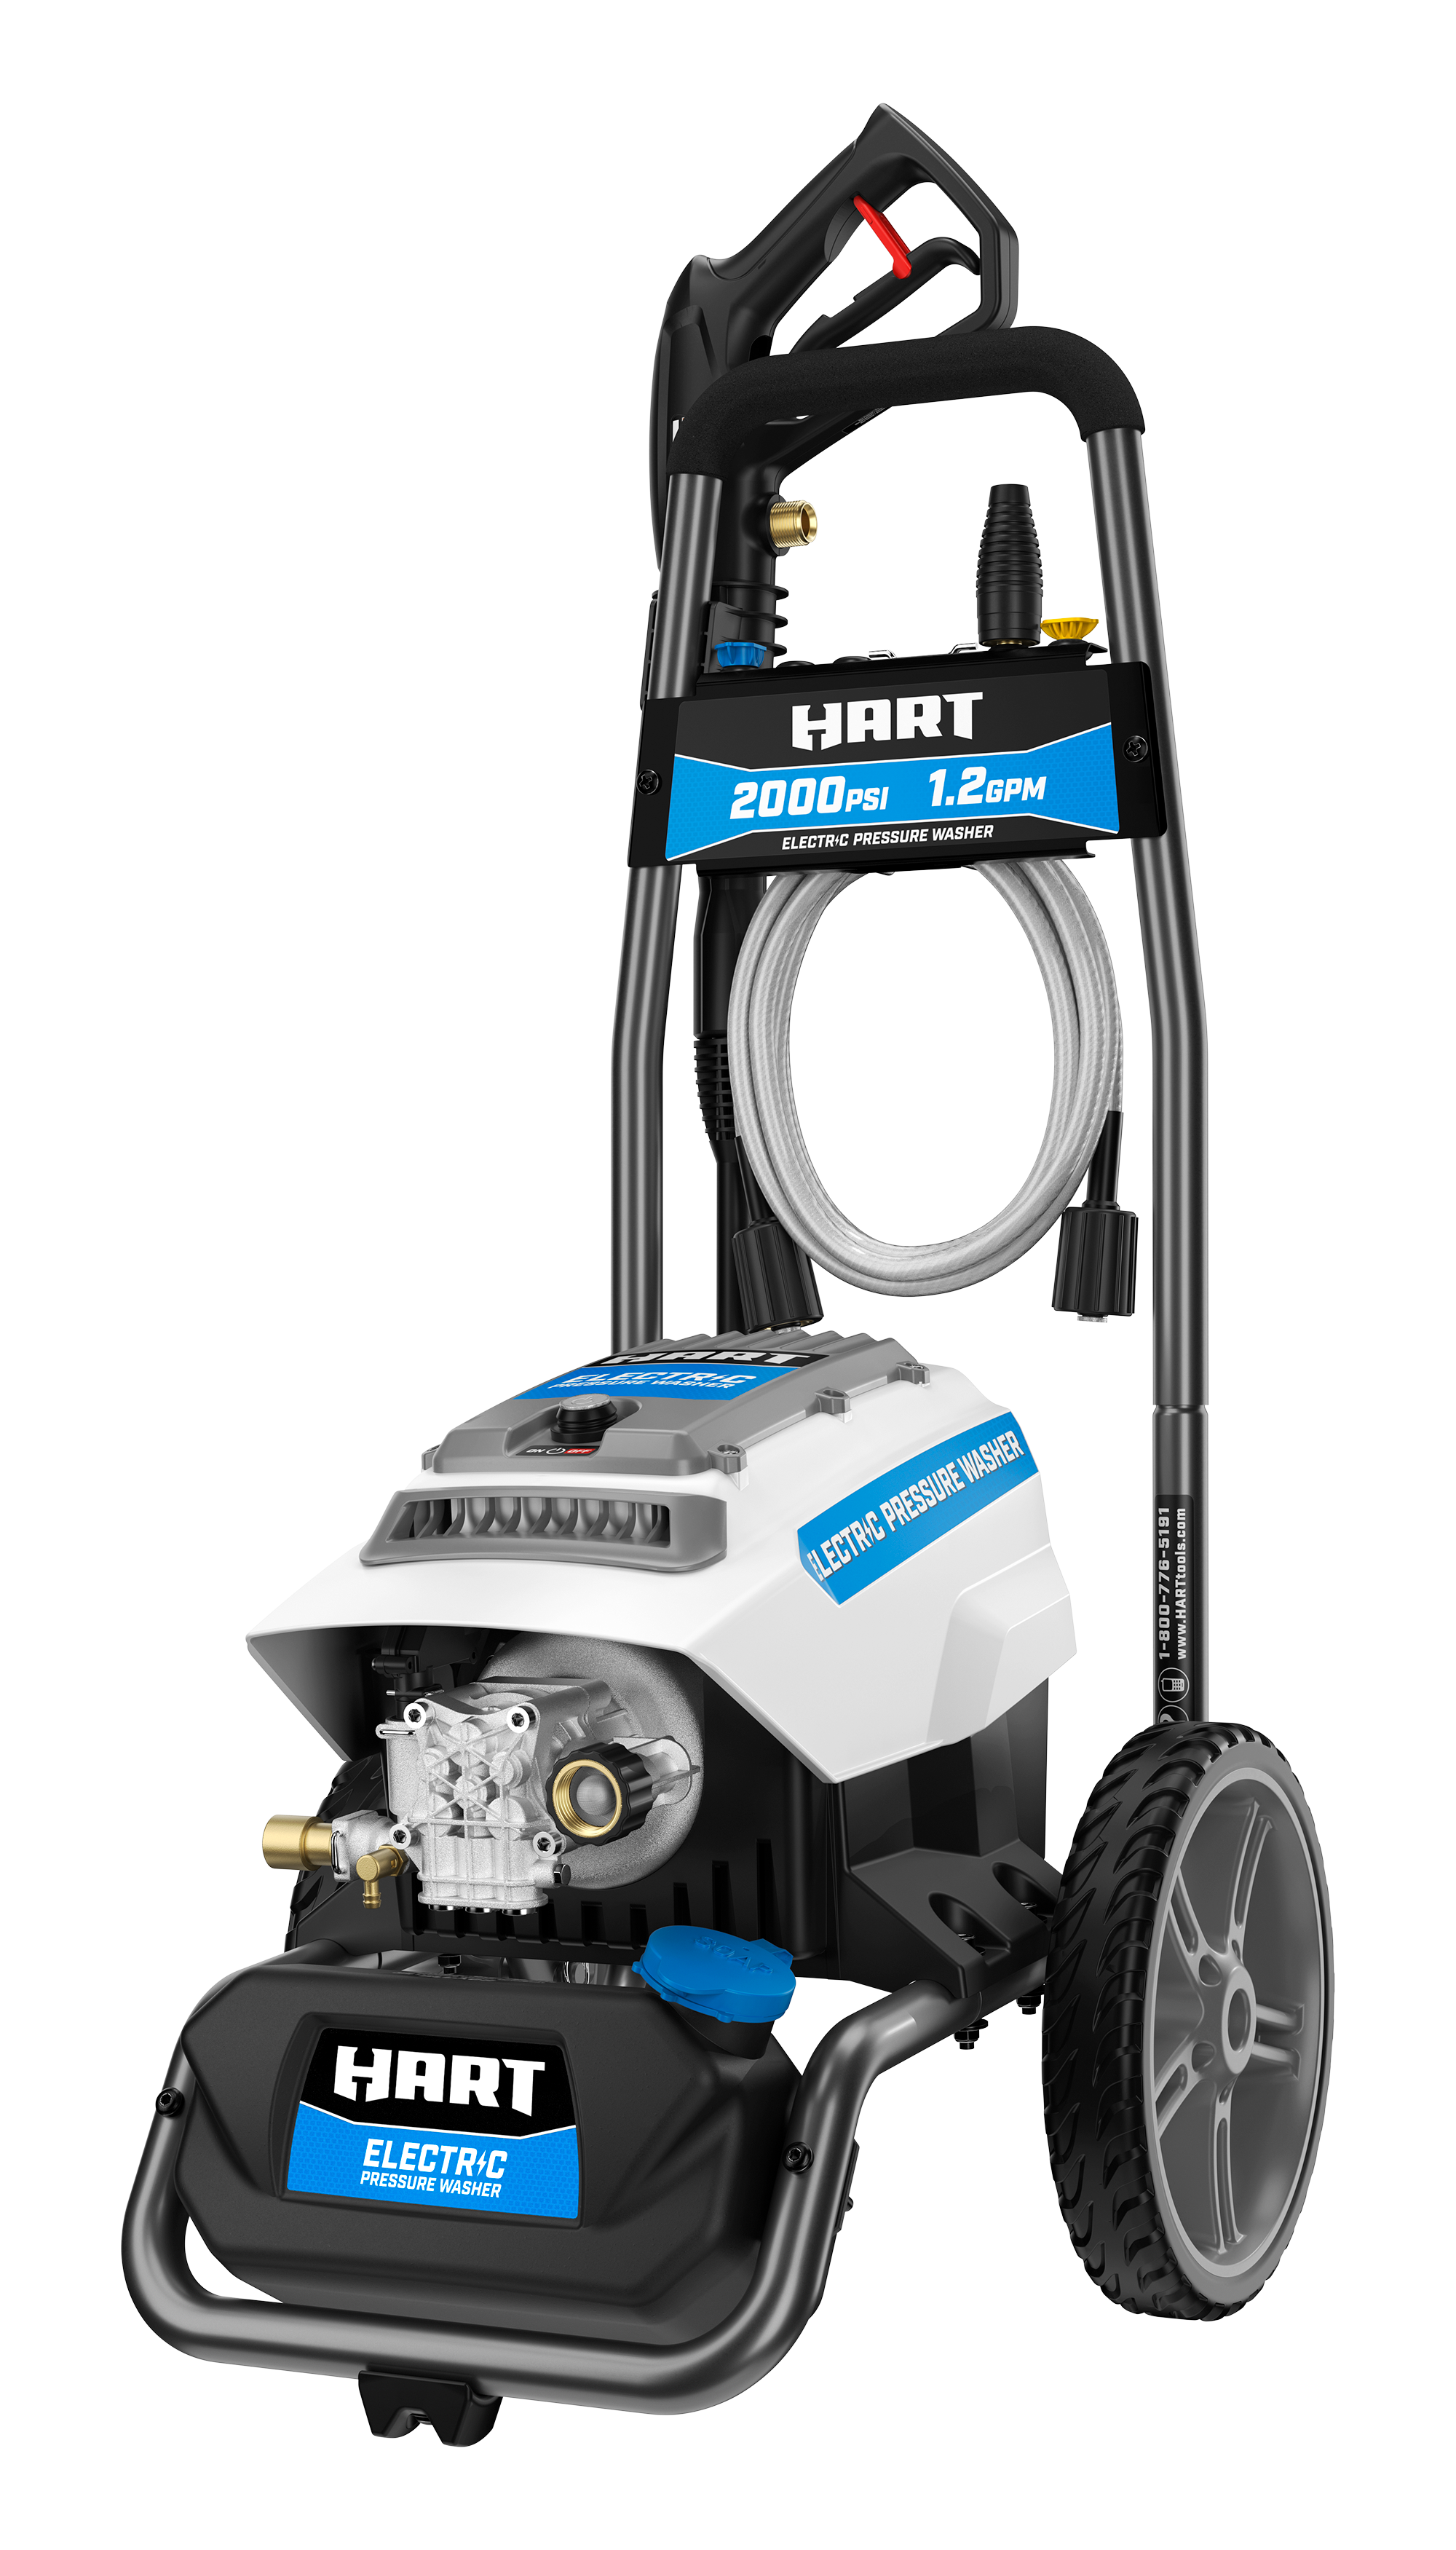 HART 2000PSI 1.2 GPM Electric Pressure Washer - image 1 of 10